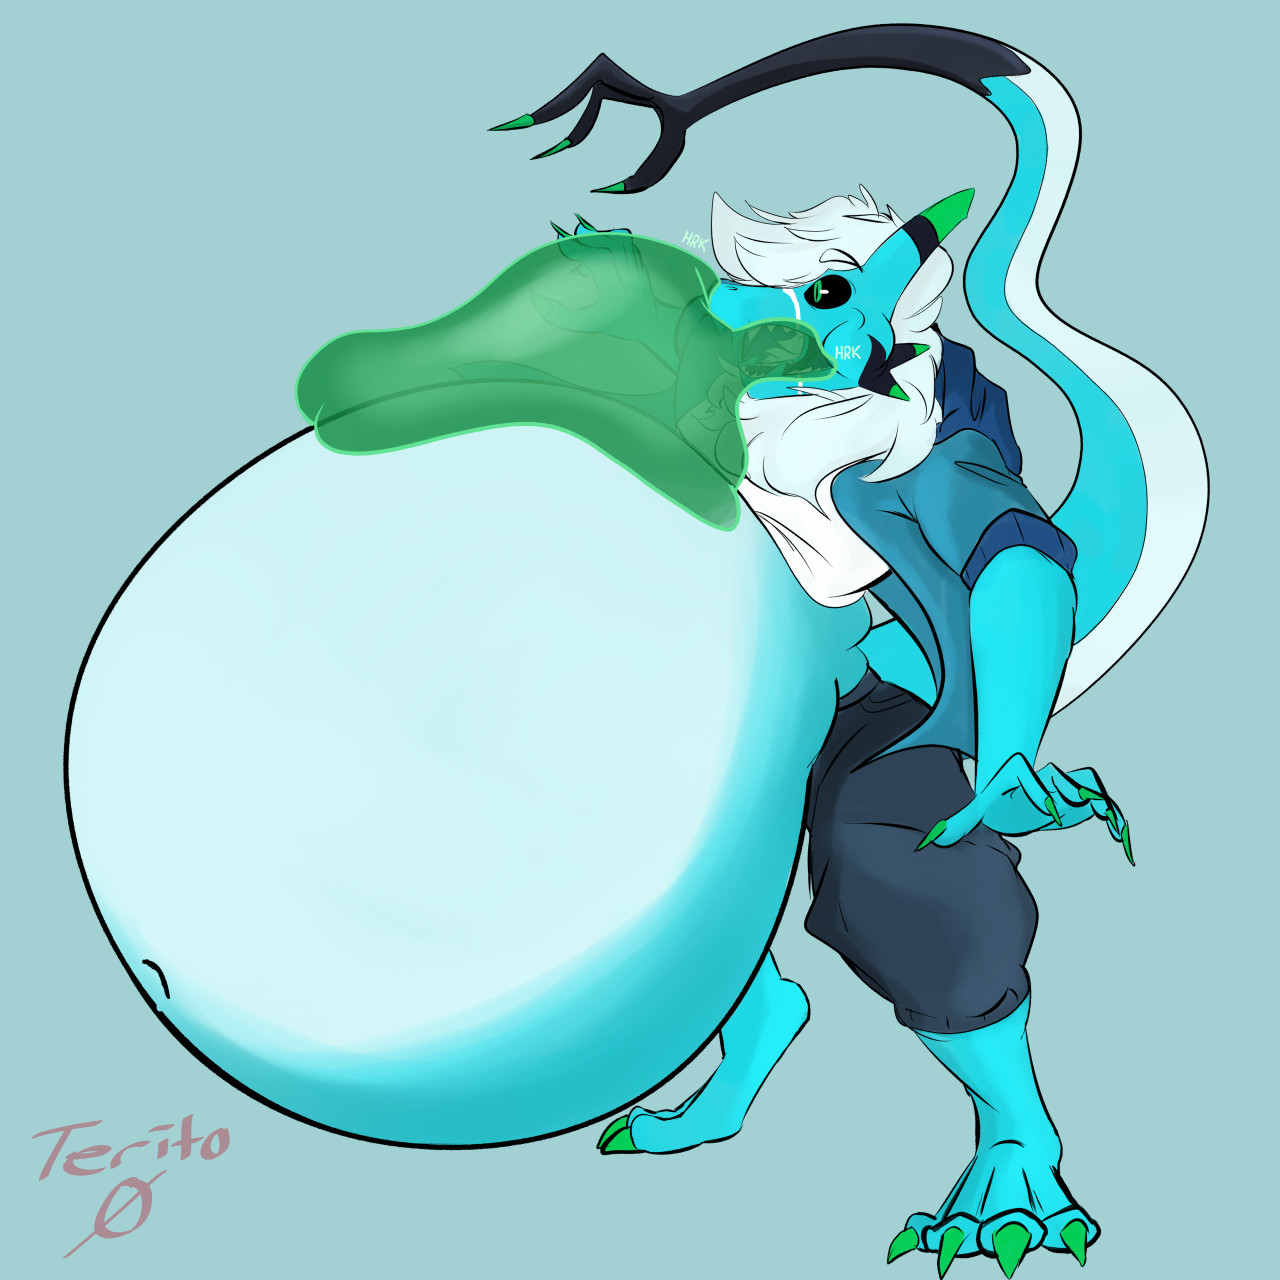 Slime belly expansion